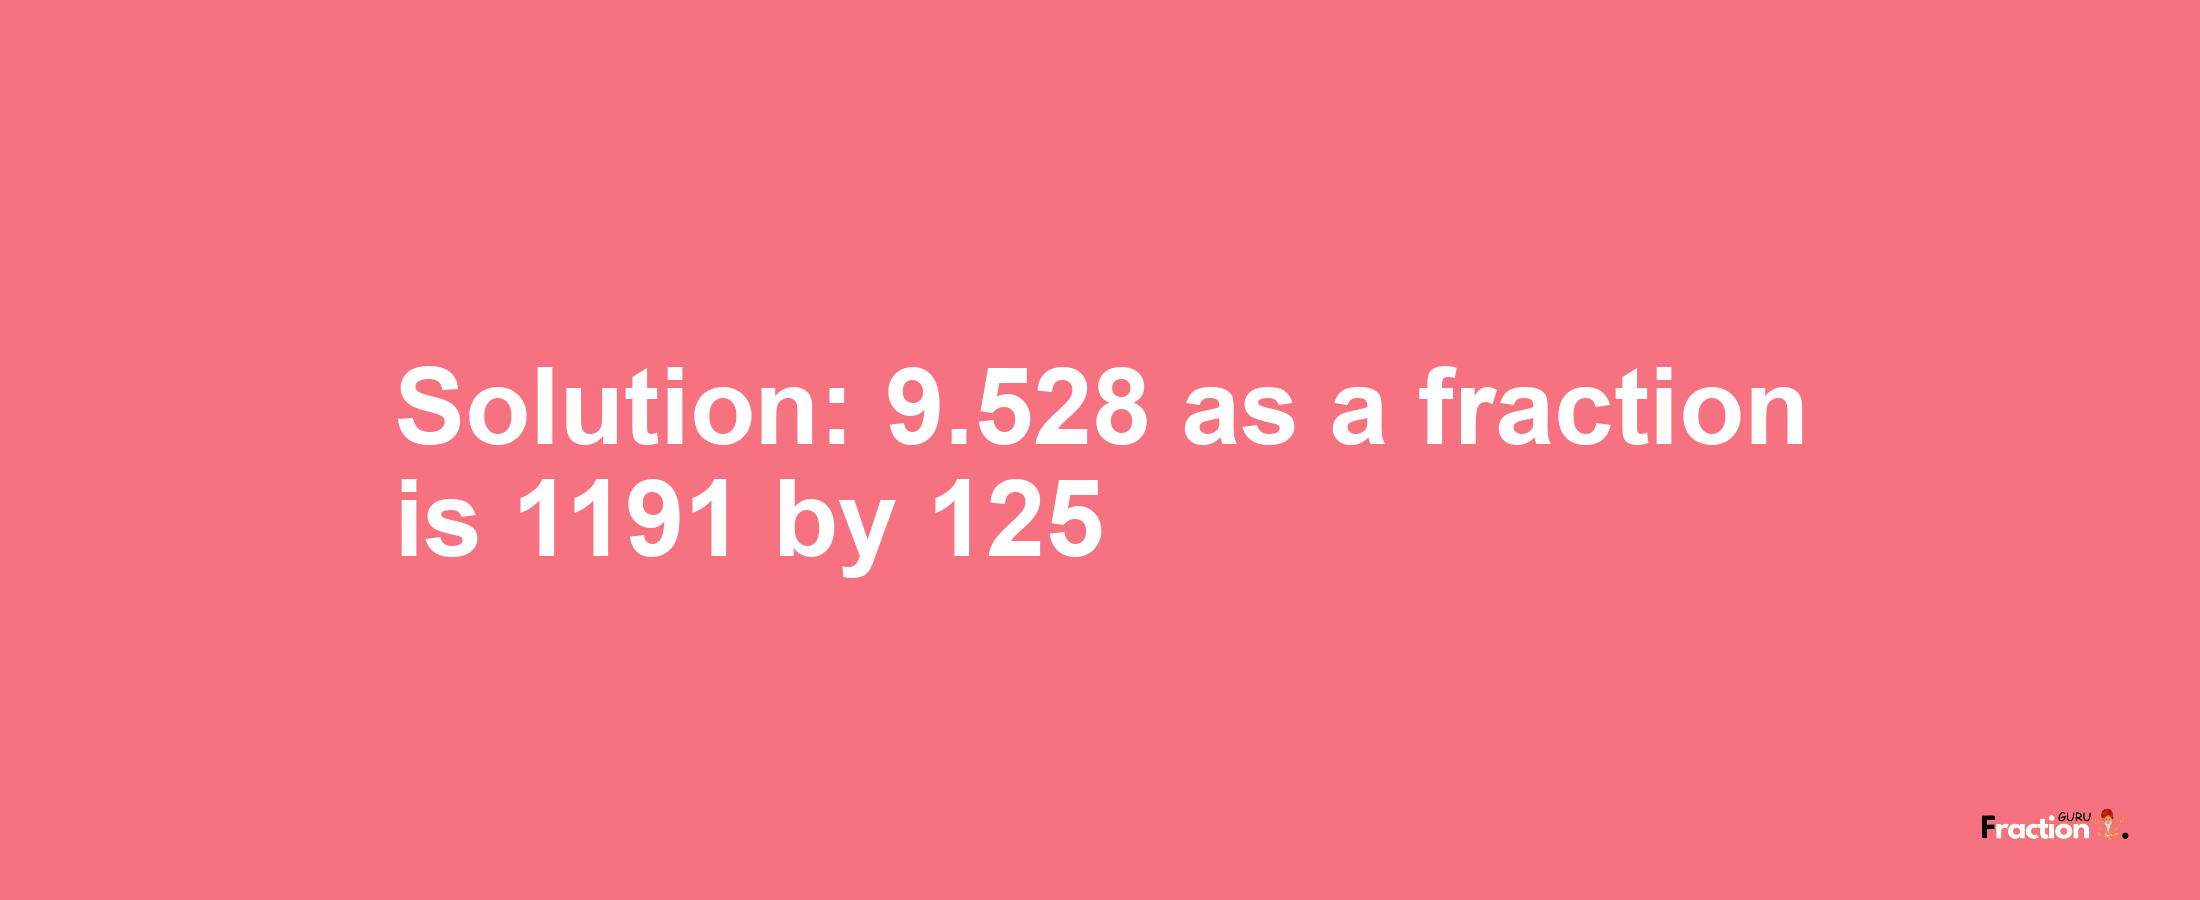 Solution:9.528 as a fraction is 1191/125